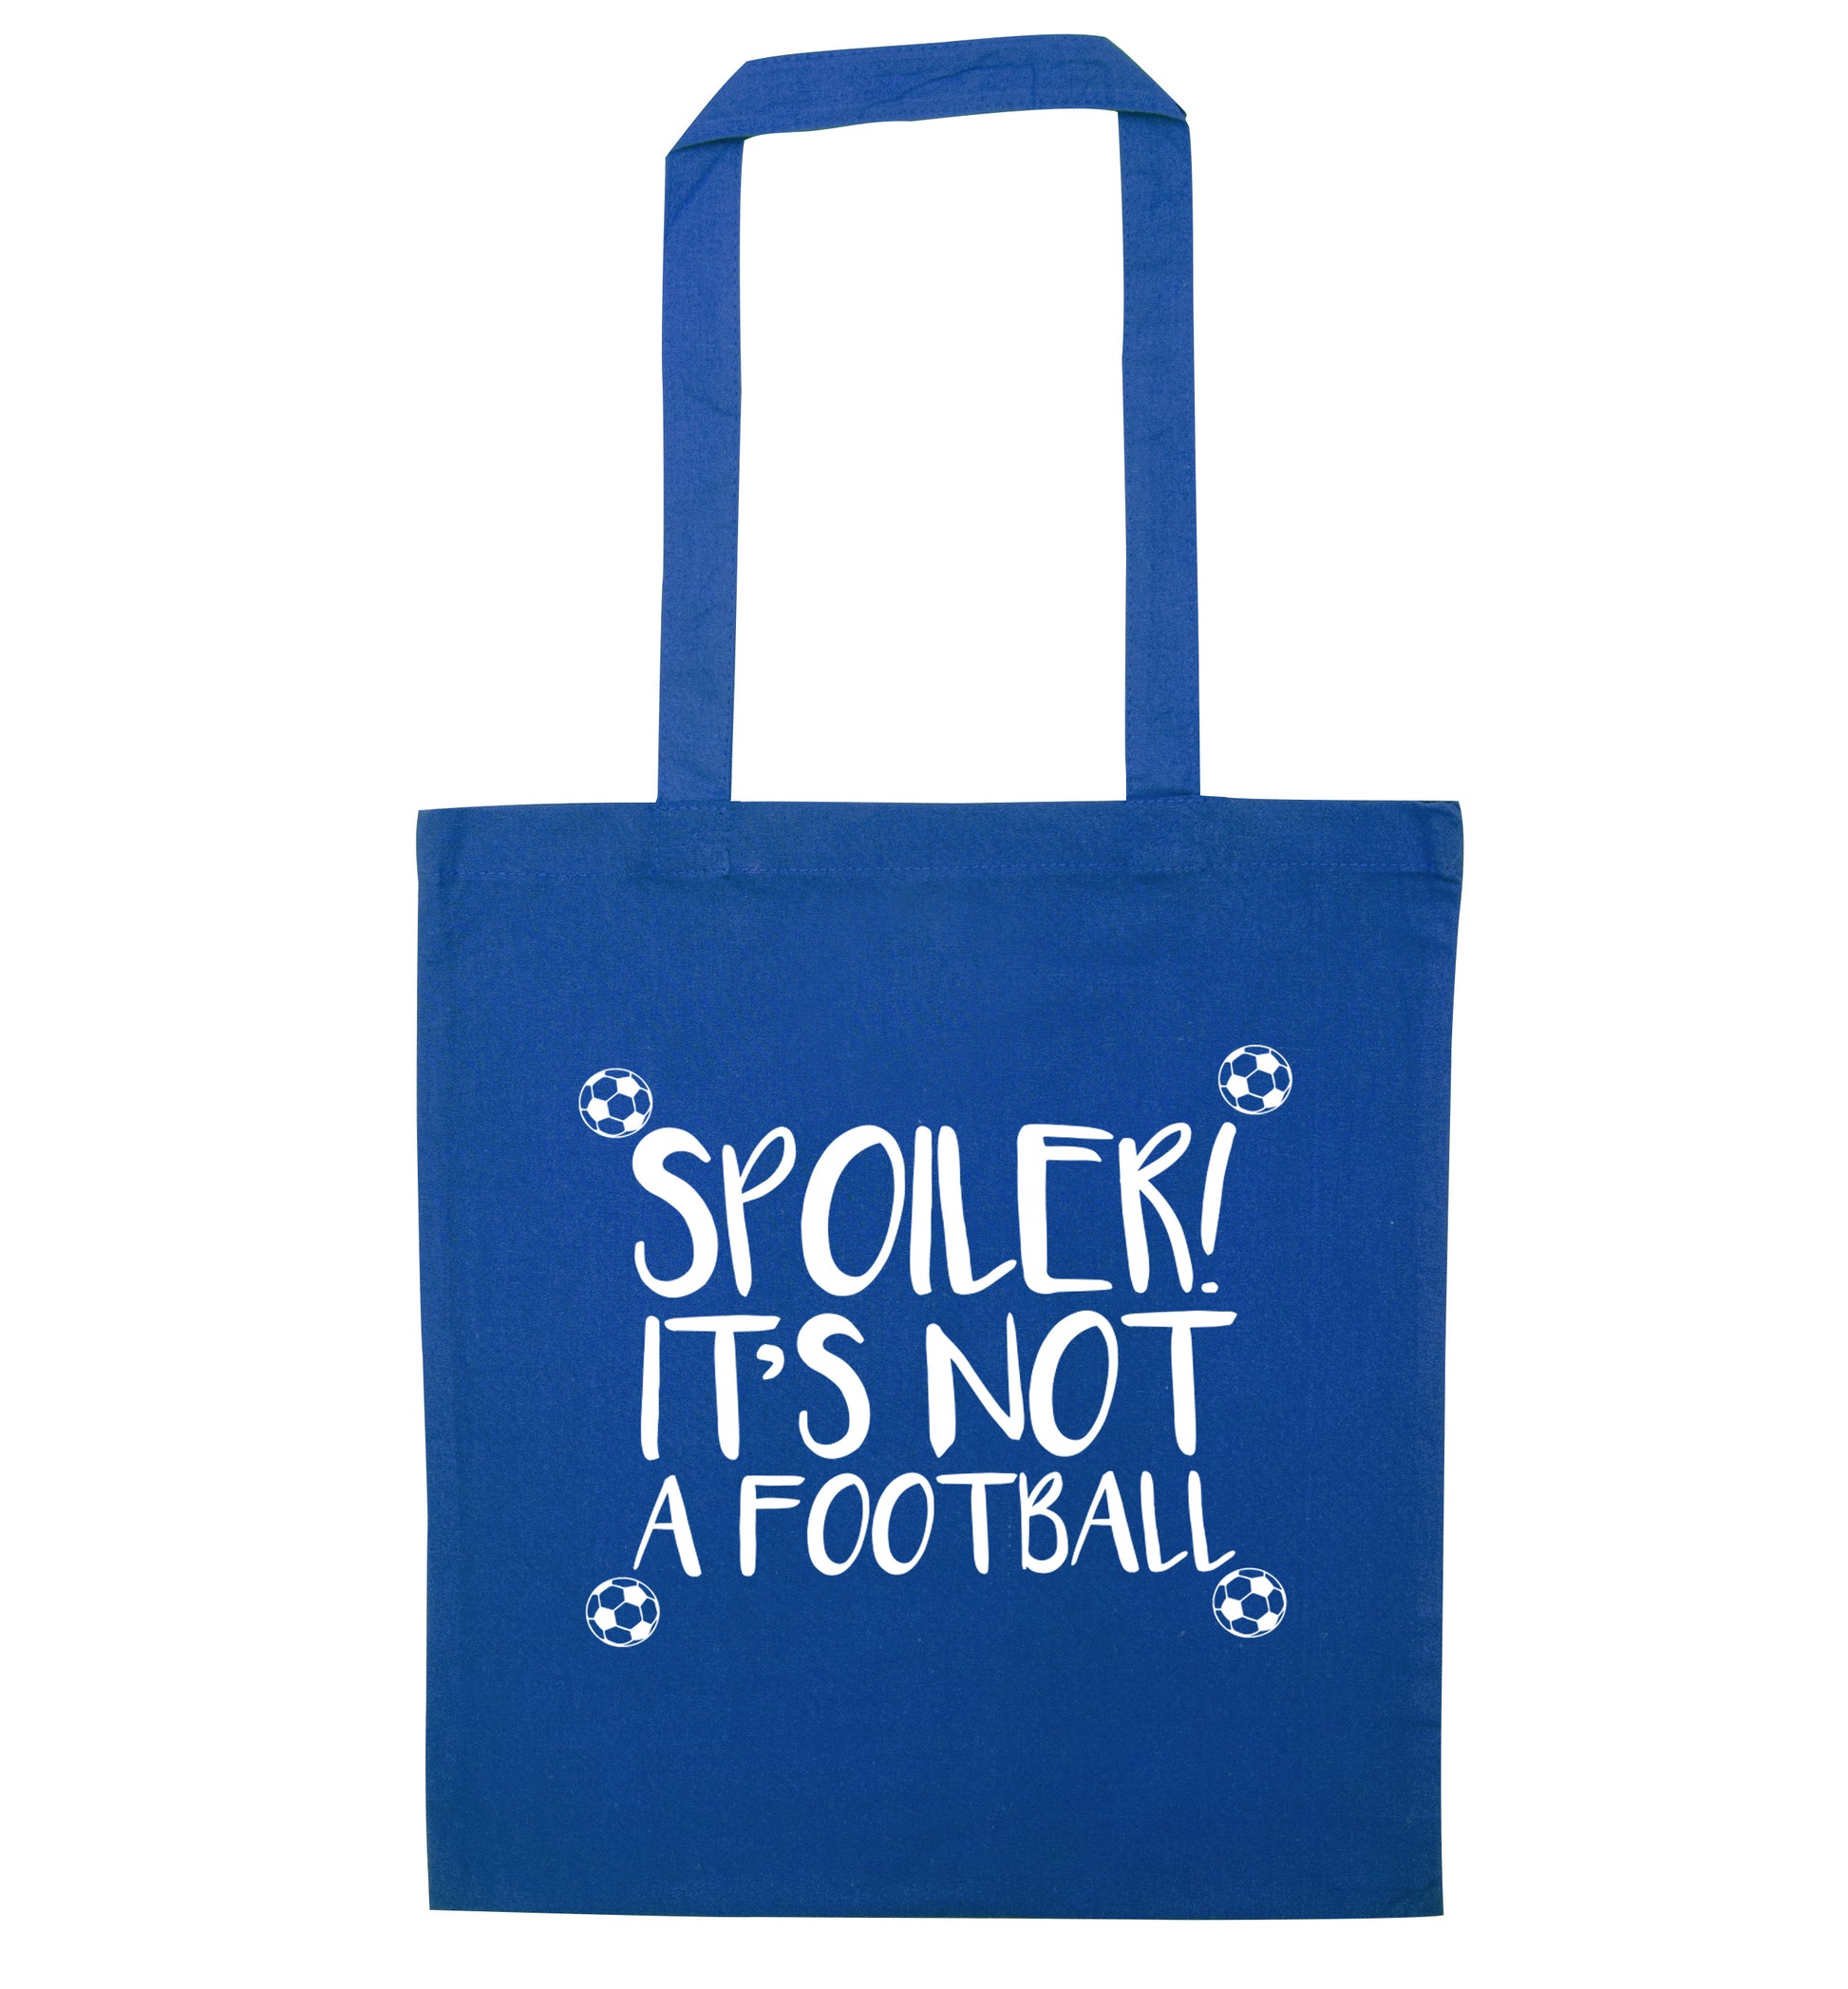 Spoiler it's not a football blue tote bag